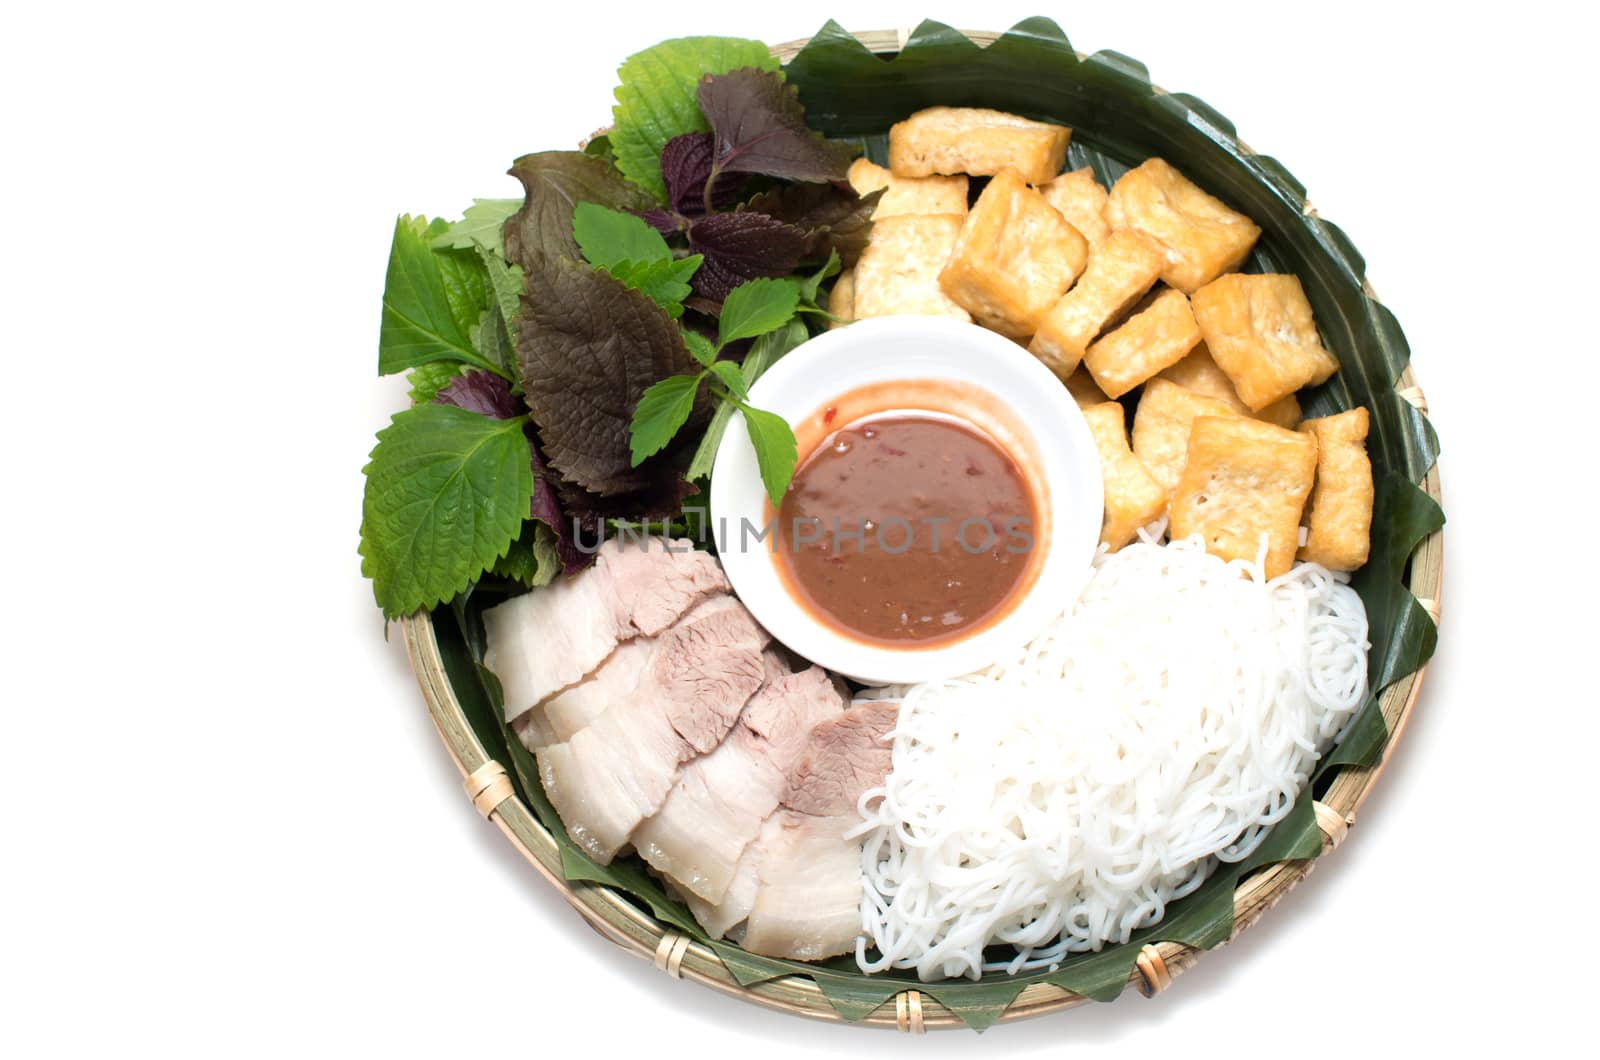 Vietnamese traditional plate pork vermicelli  tofu and vegetable